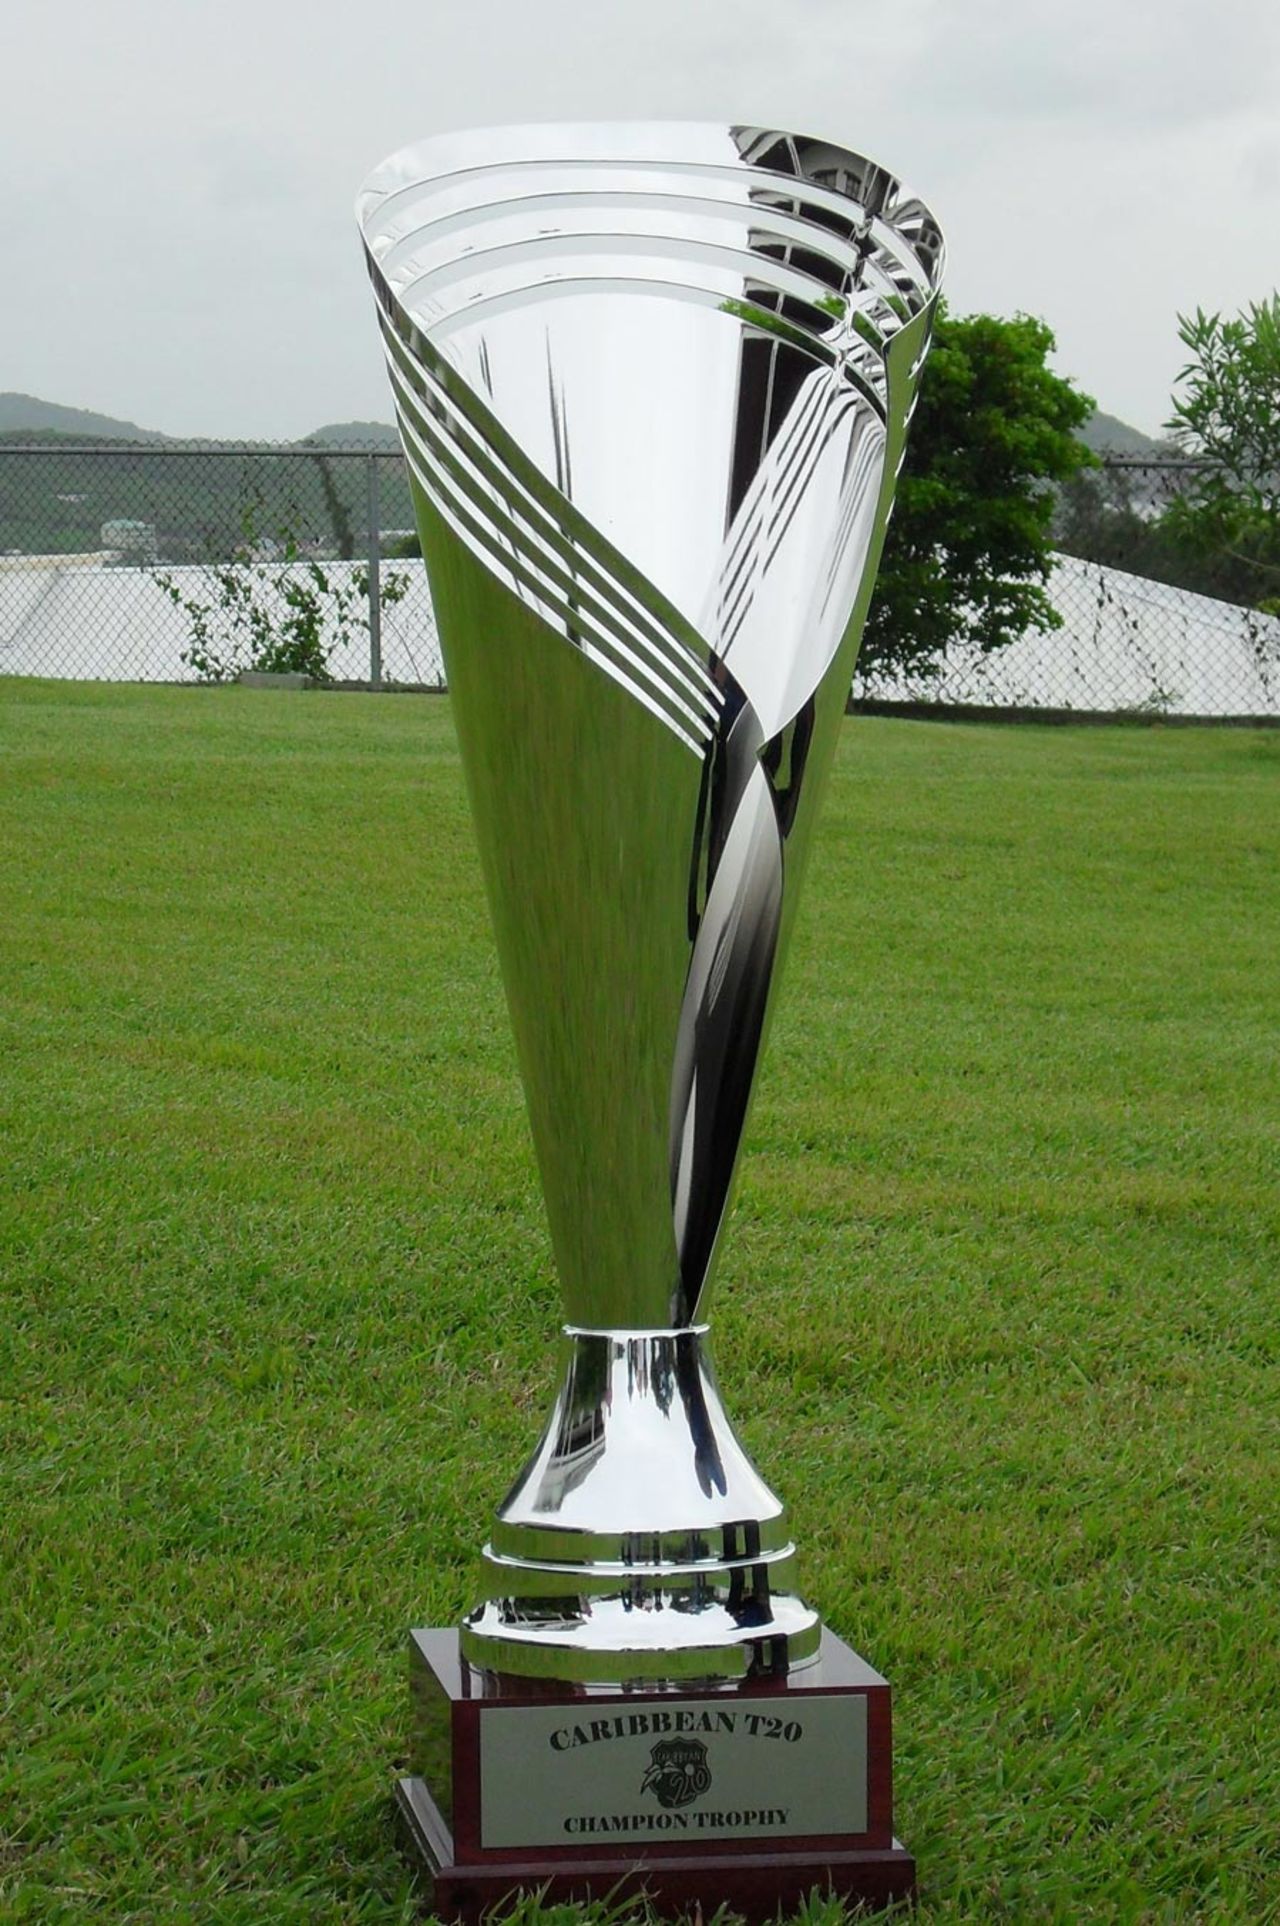 The Caribbean T20 Champions trophy, July 21, 2010